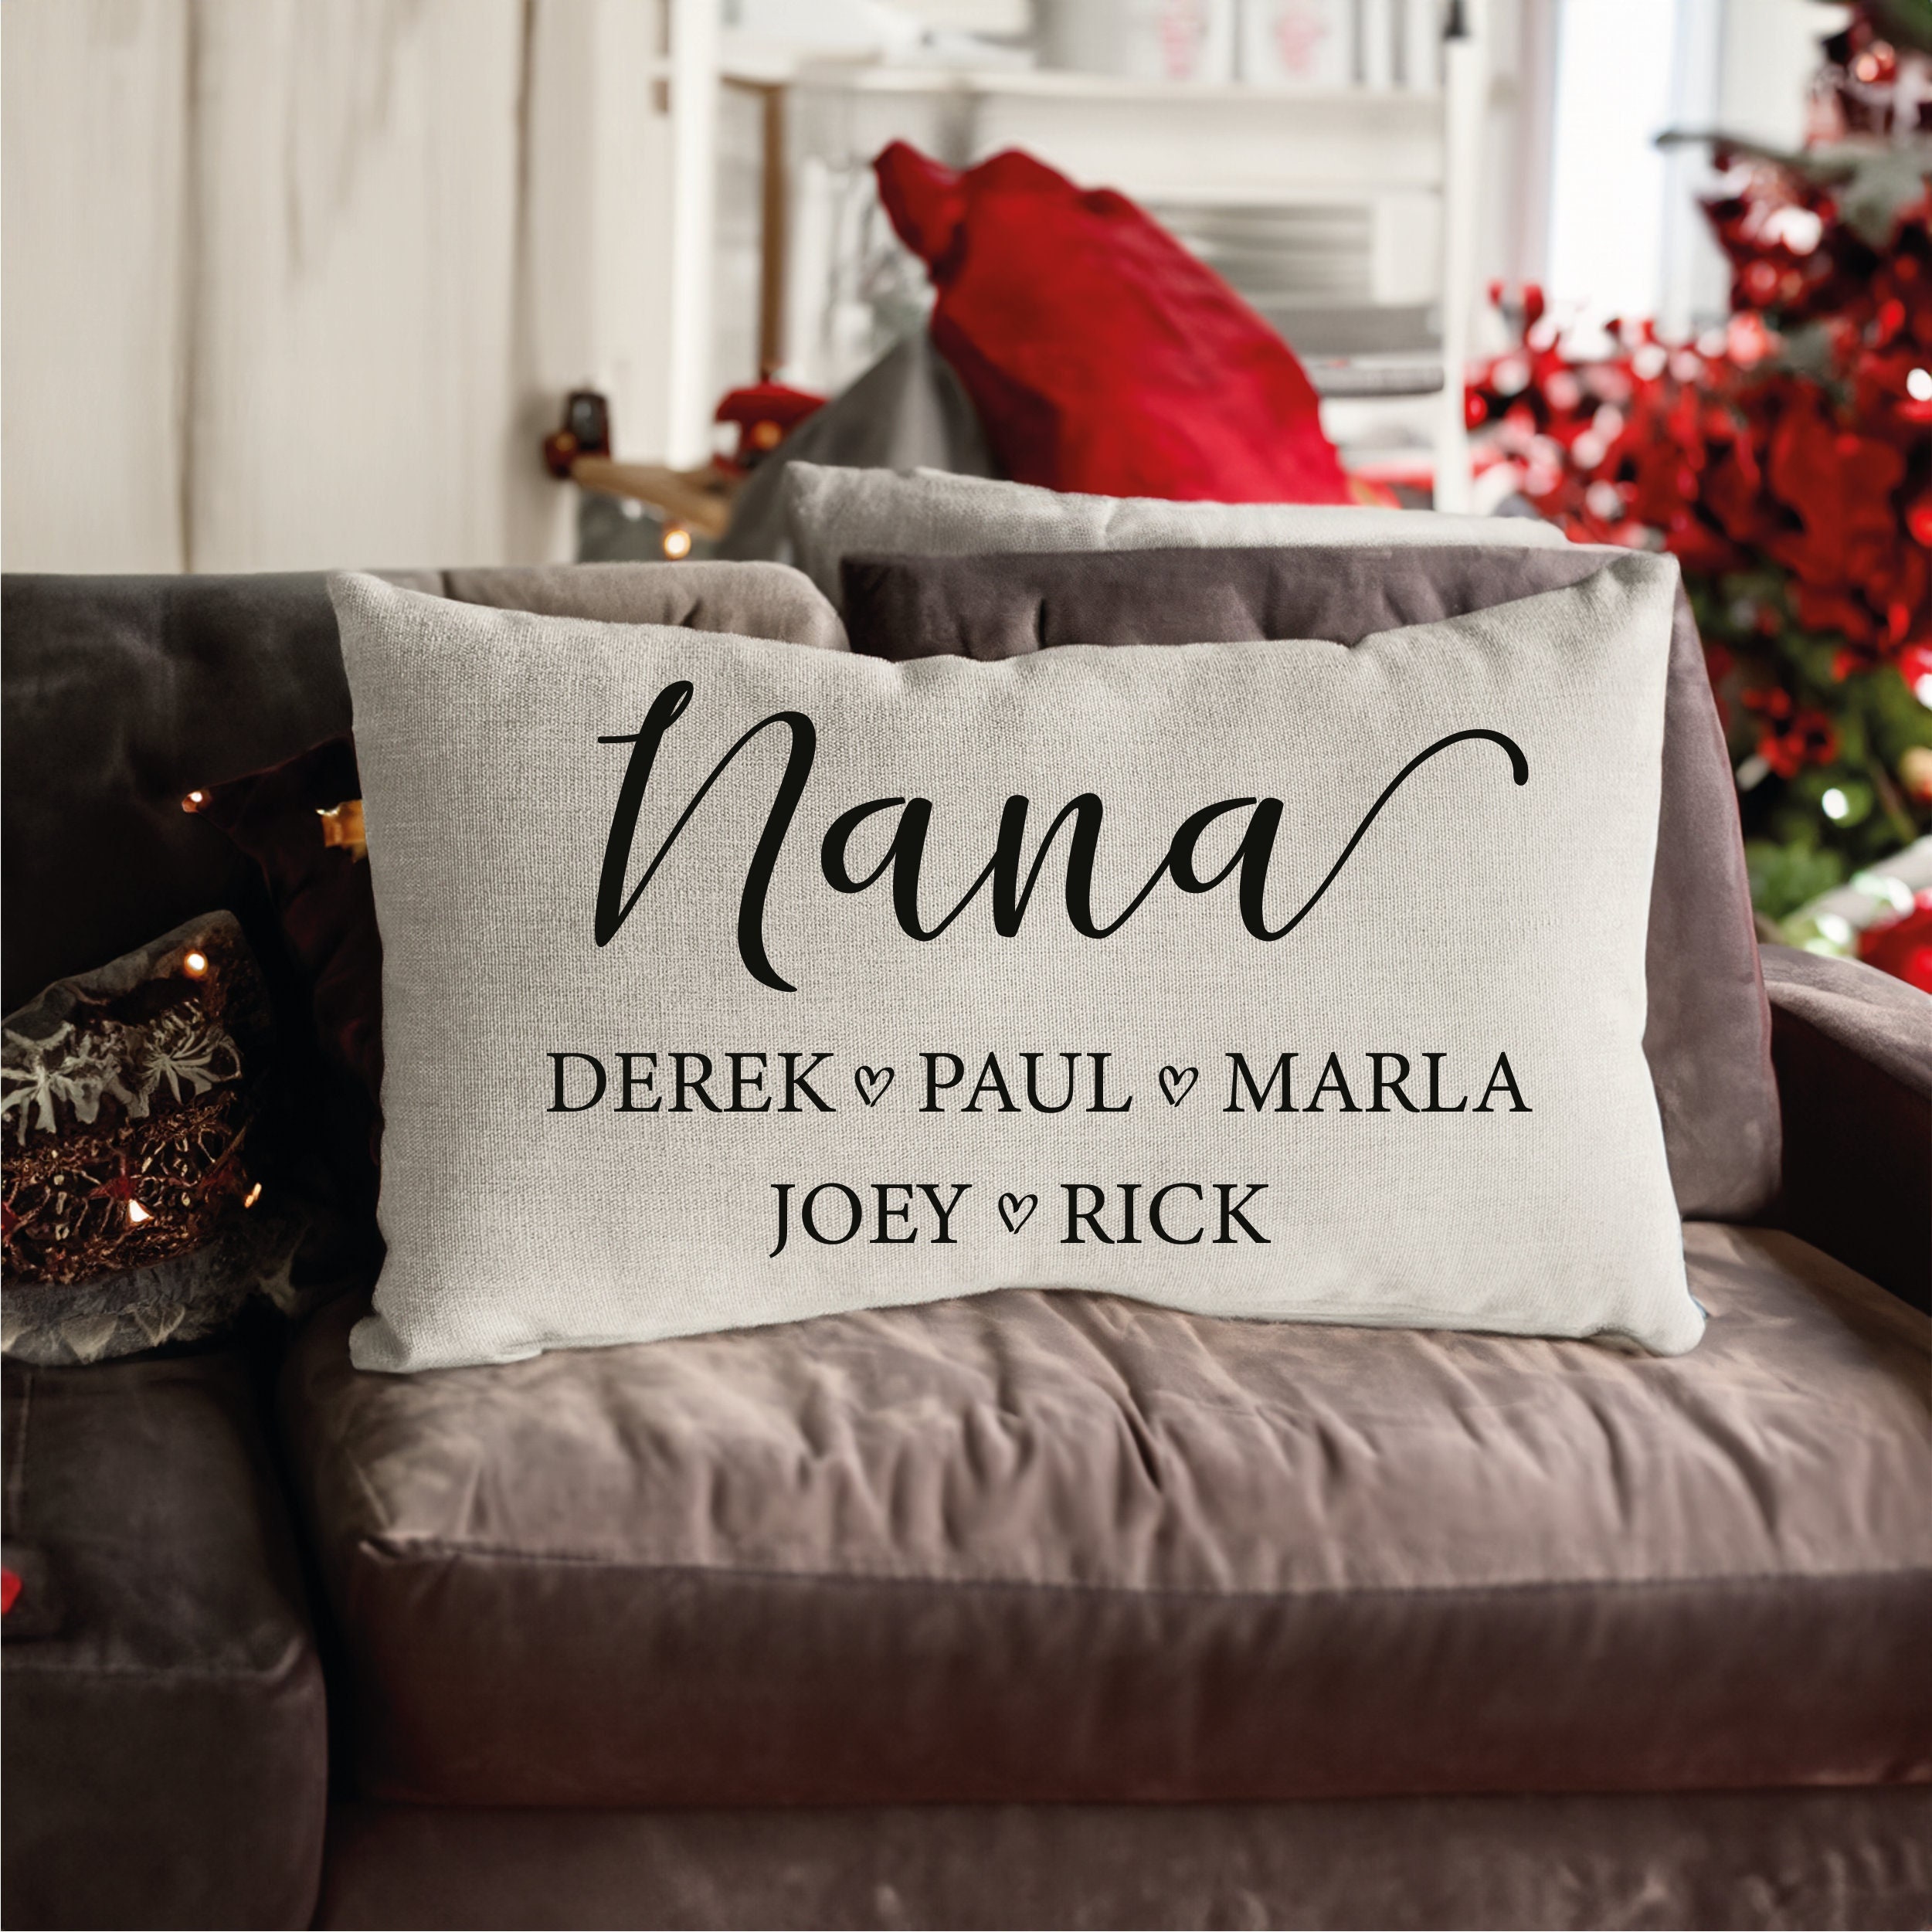 Nana Gifts Grandma Gifts, 2-Pocket Nana Throw Pillow Covers 18x18 Inch and  Engraved Spoon Birthday Christmas Stocking Stuffers Valentine's Day Gifts